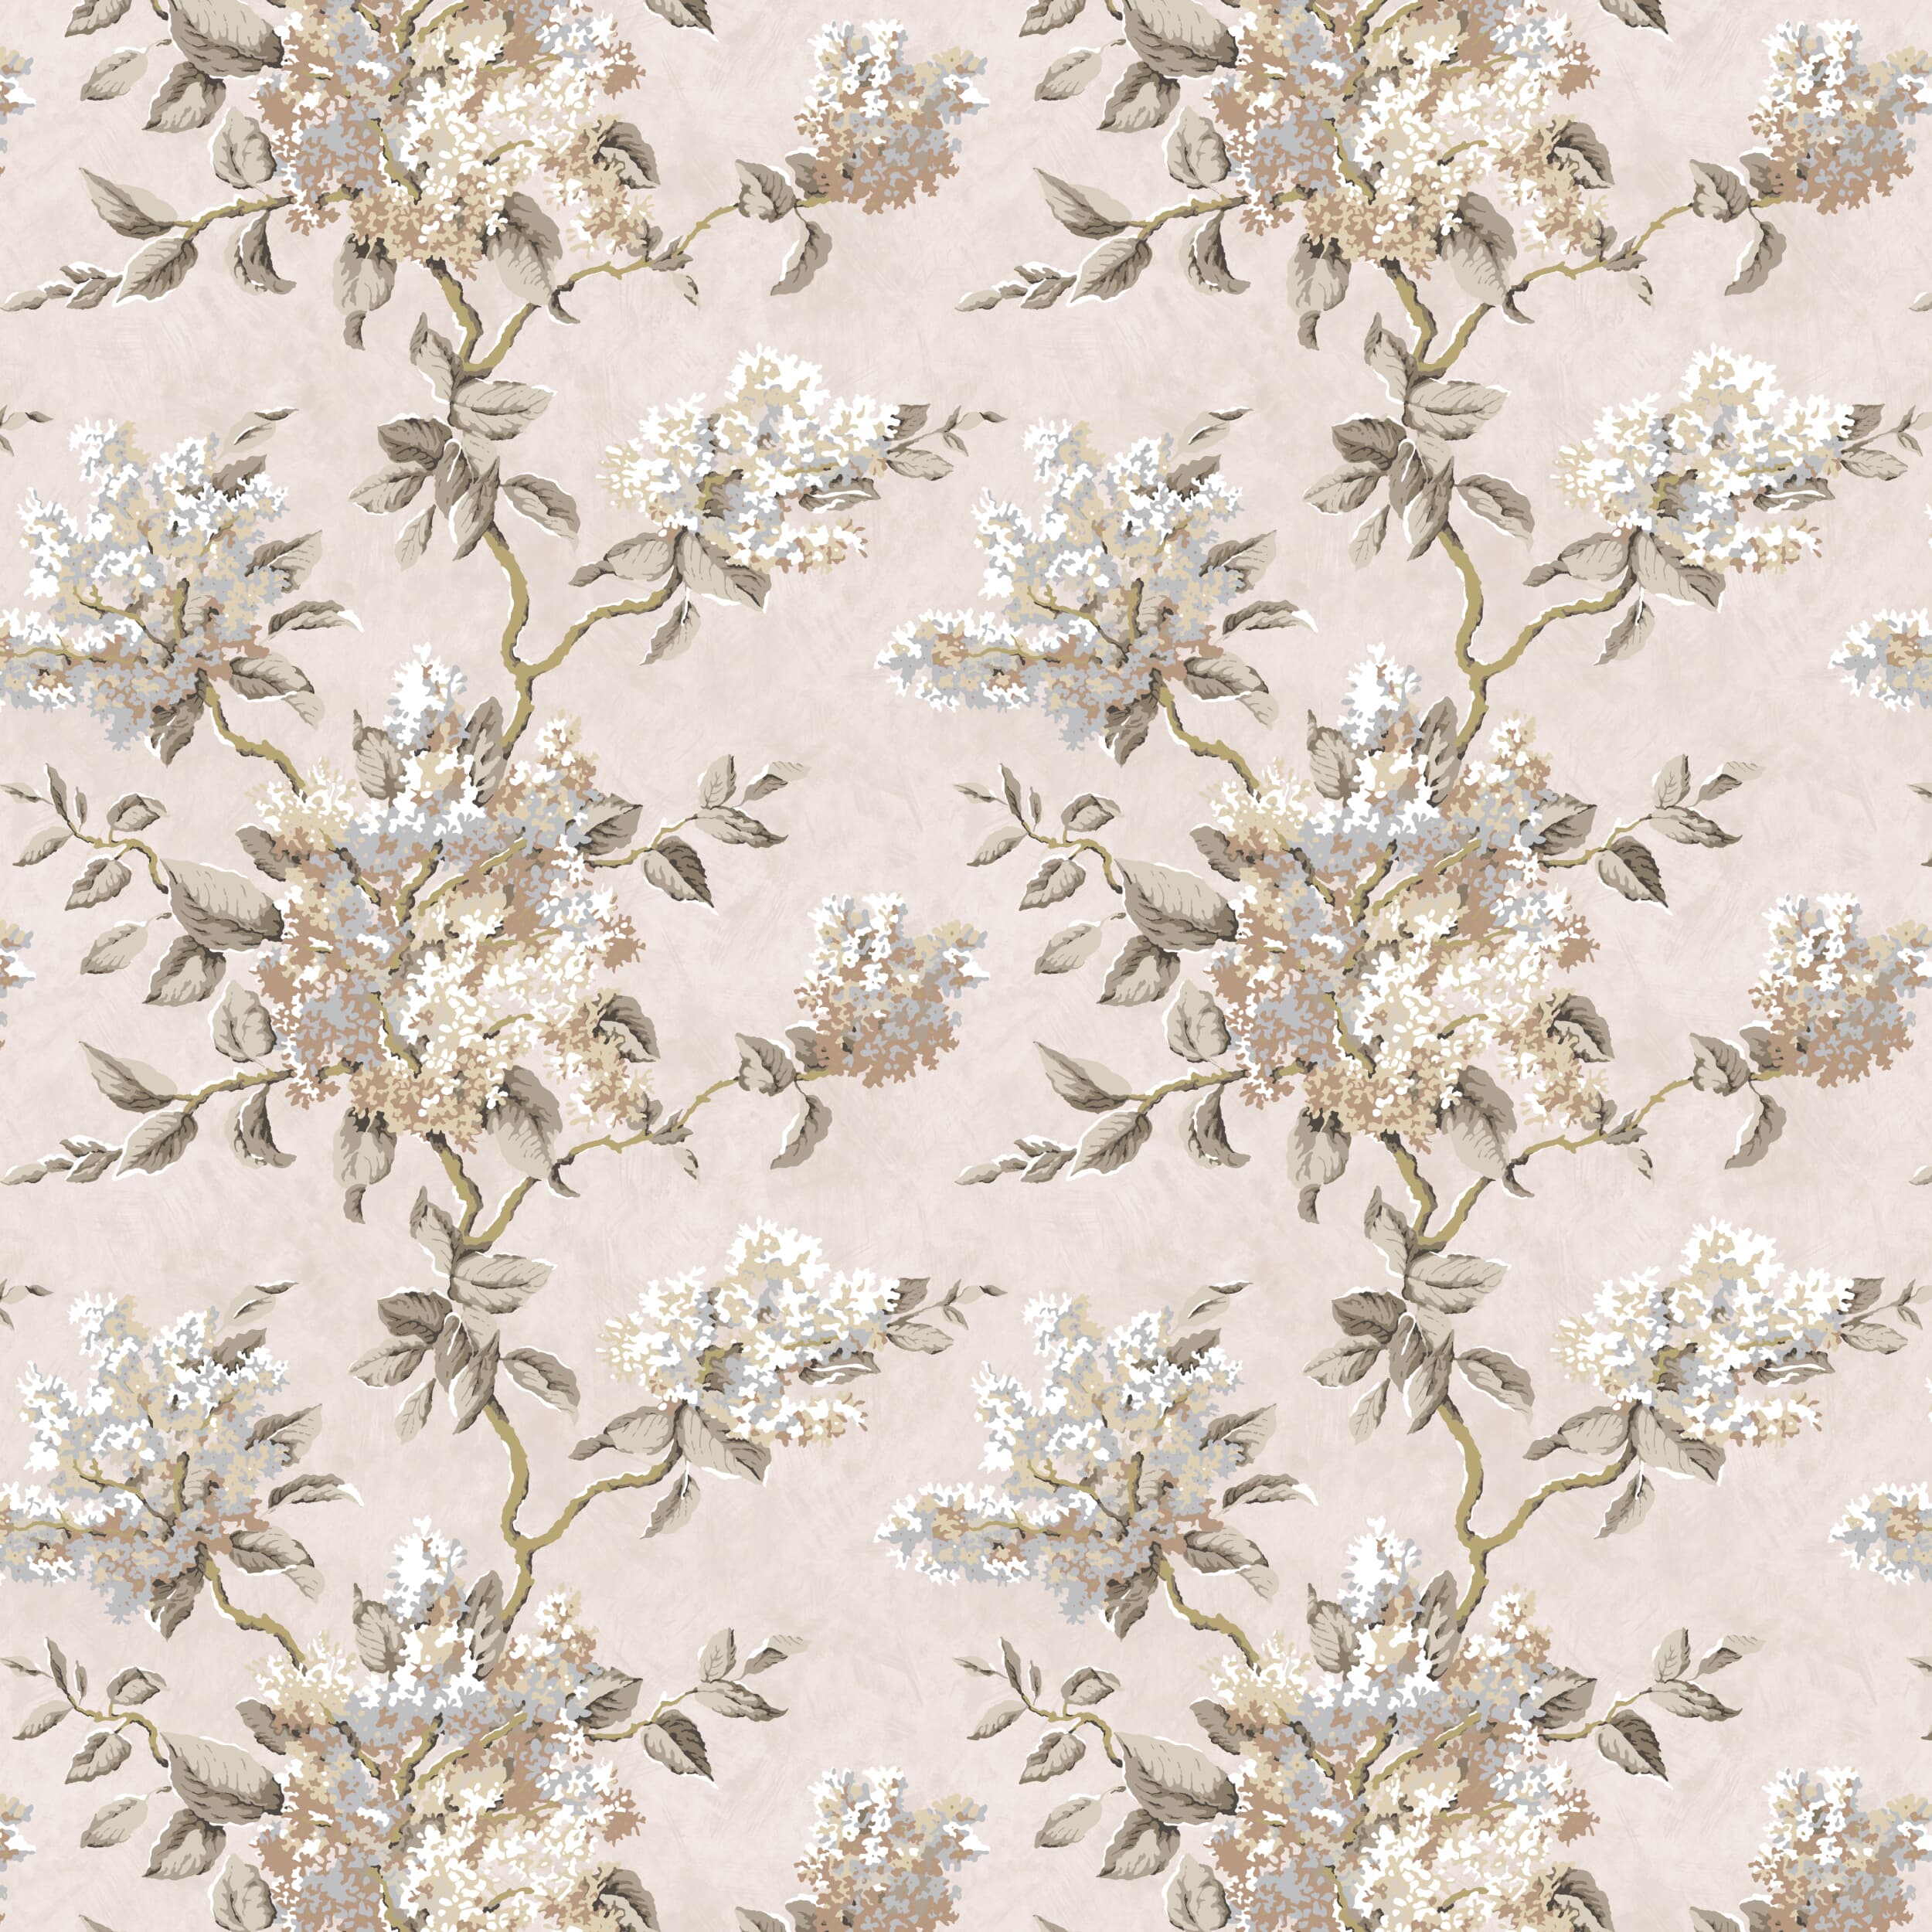 7829-1 Lilacs Sandstone by Stout Fabric